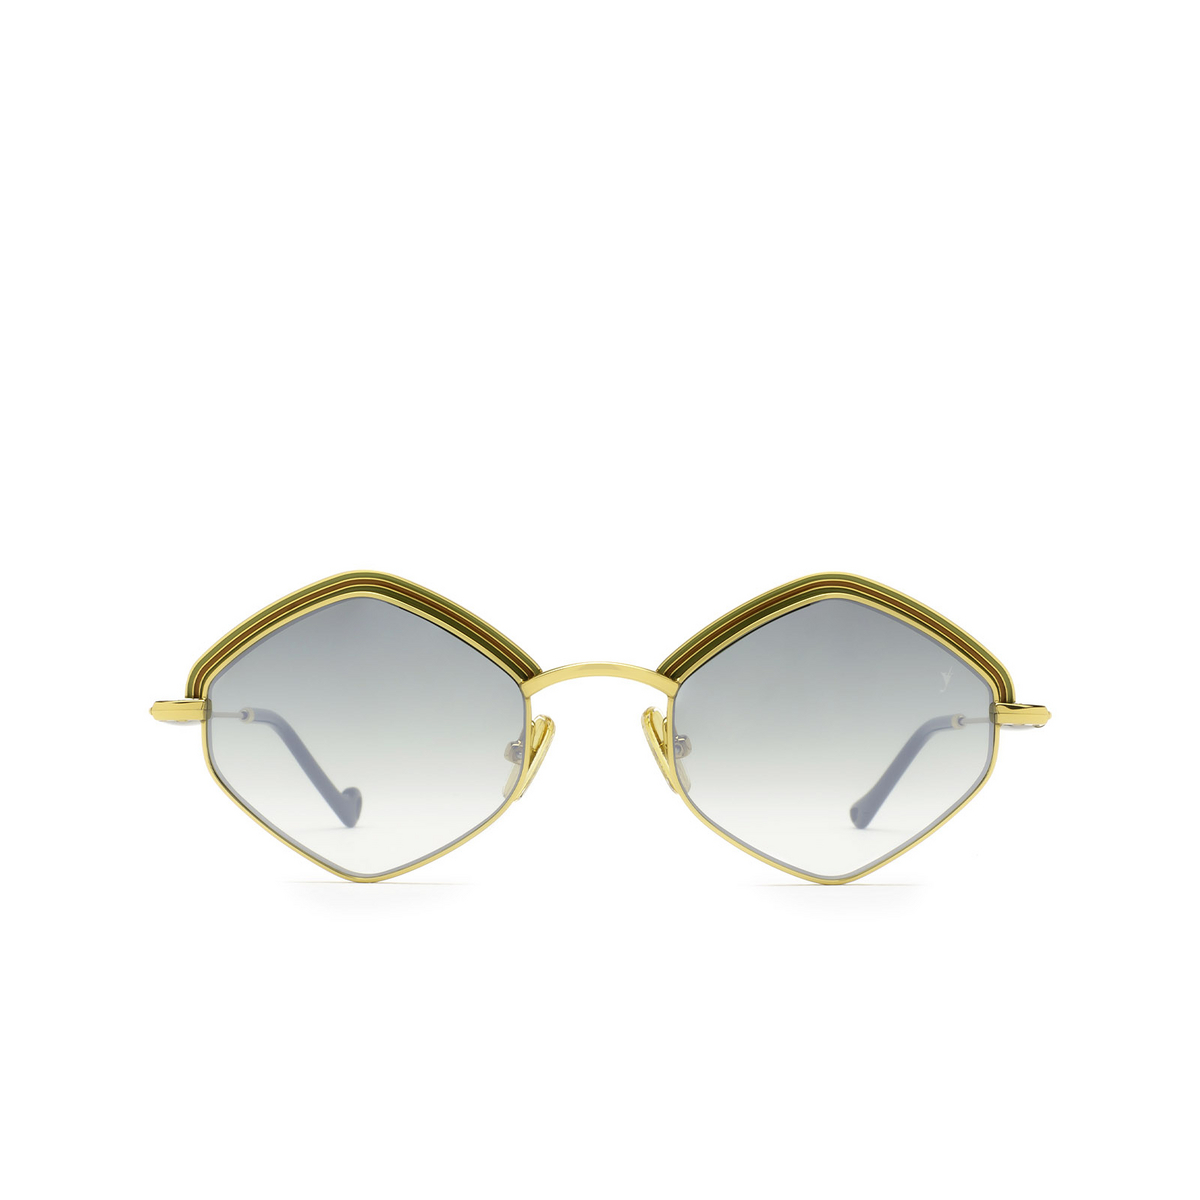 Eyepetizer® Irregular Sunglasses: Tomber Sun color Green And Gold C.4-25F - front view.